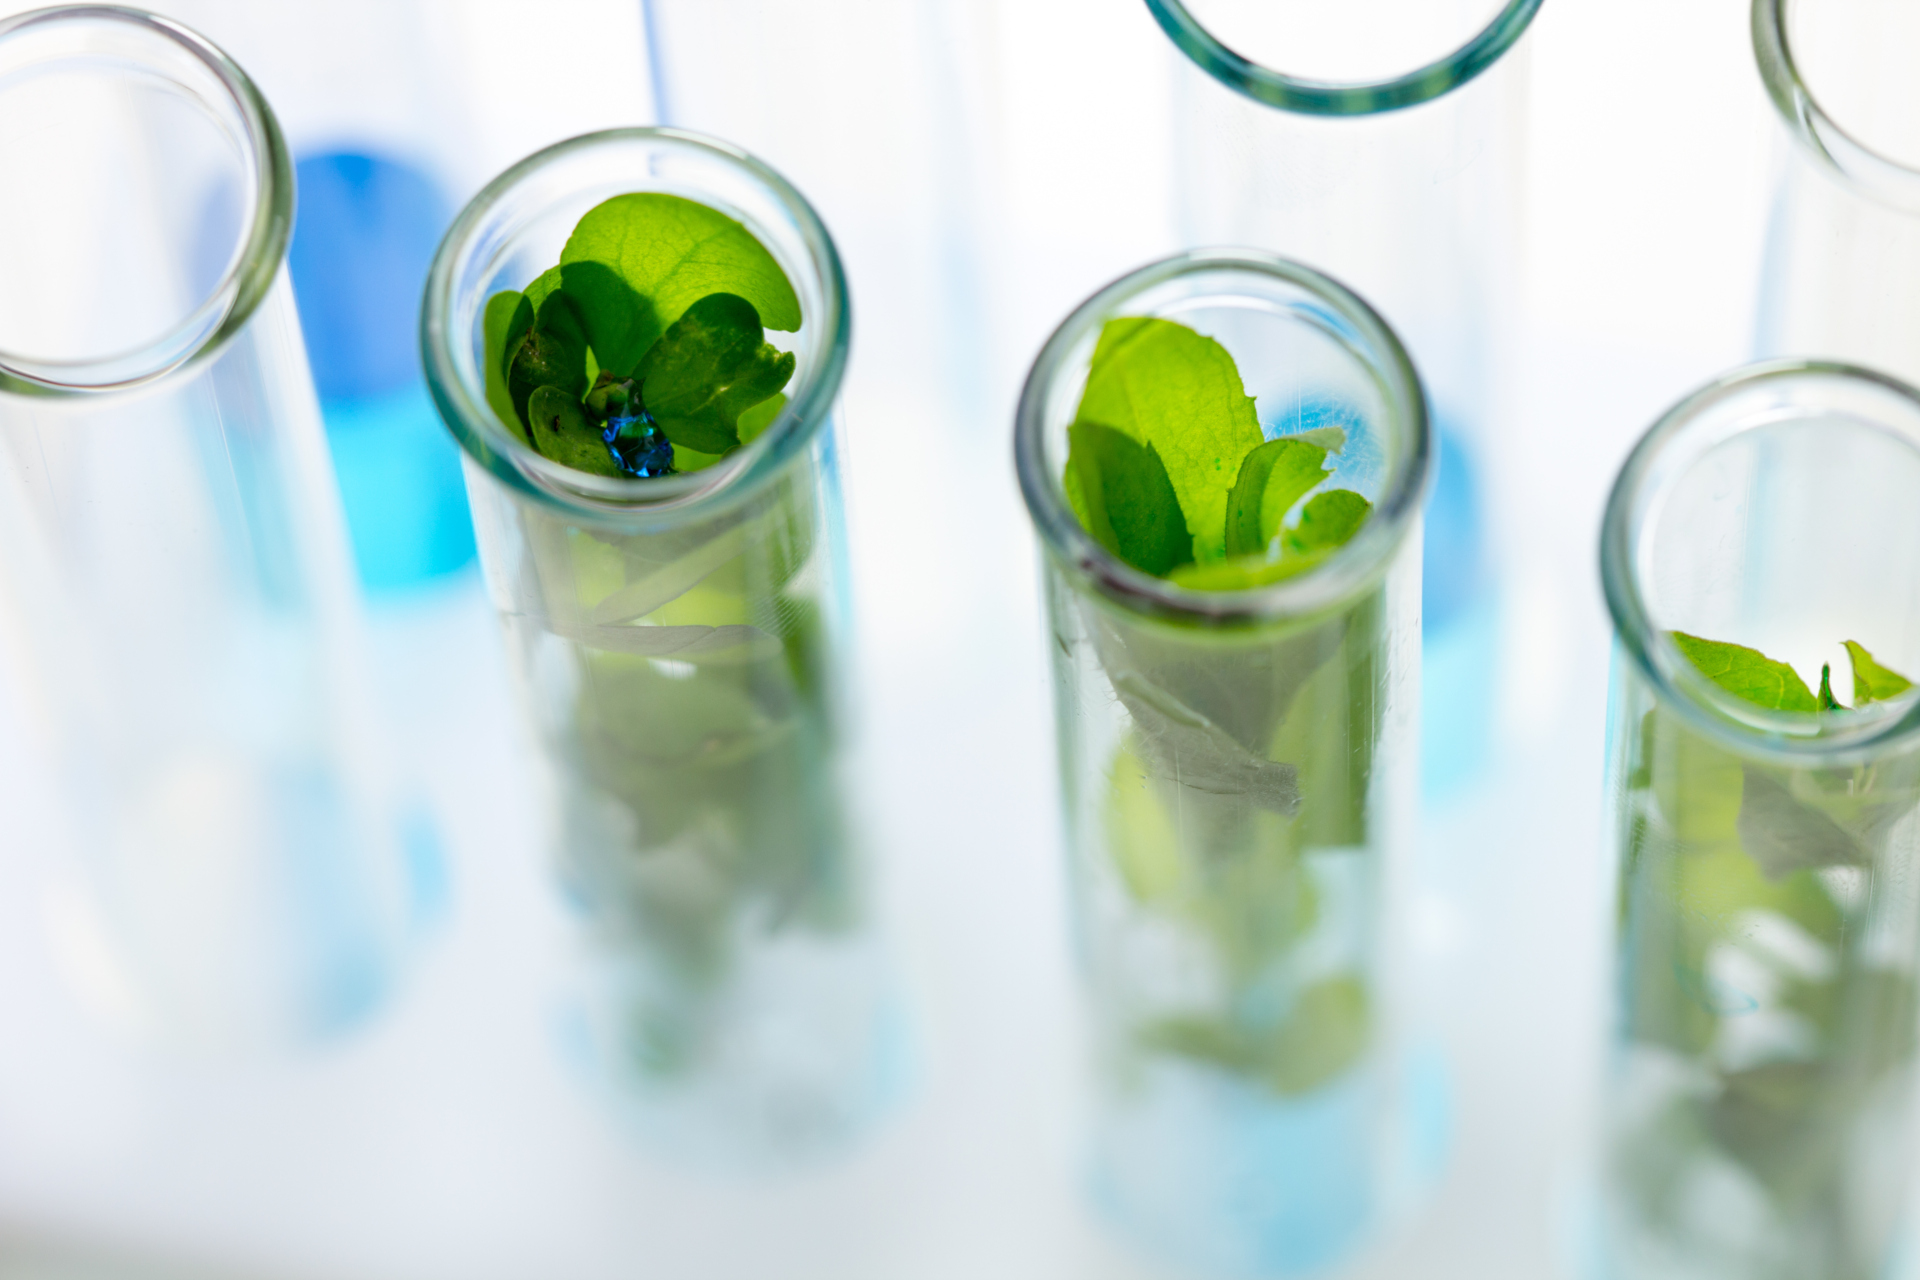 1636875022-green-fresh-plant-in-test-tube-with-blue-water-in-laboratory.jpg